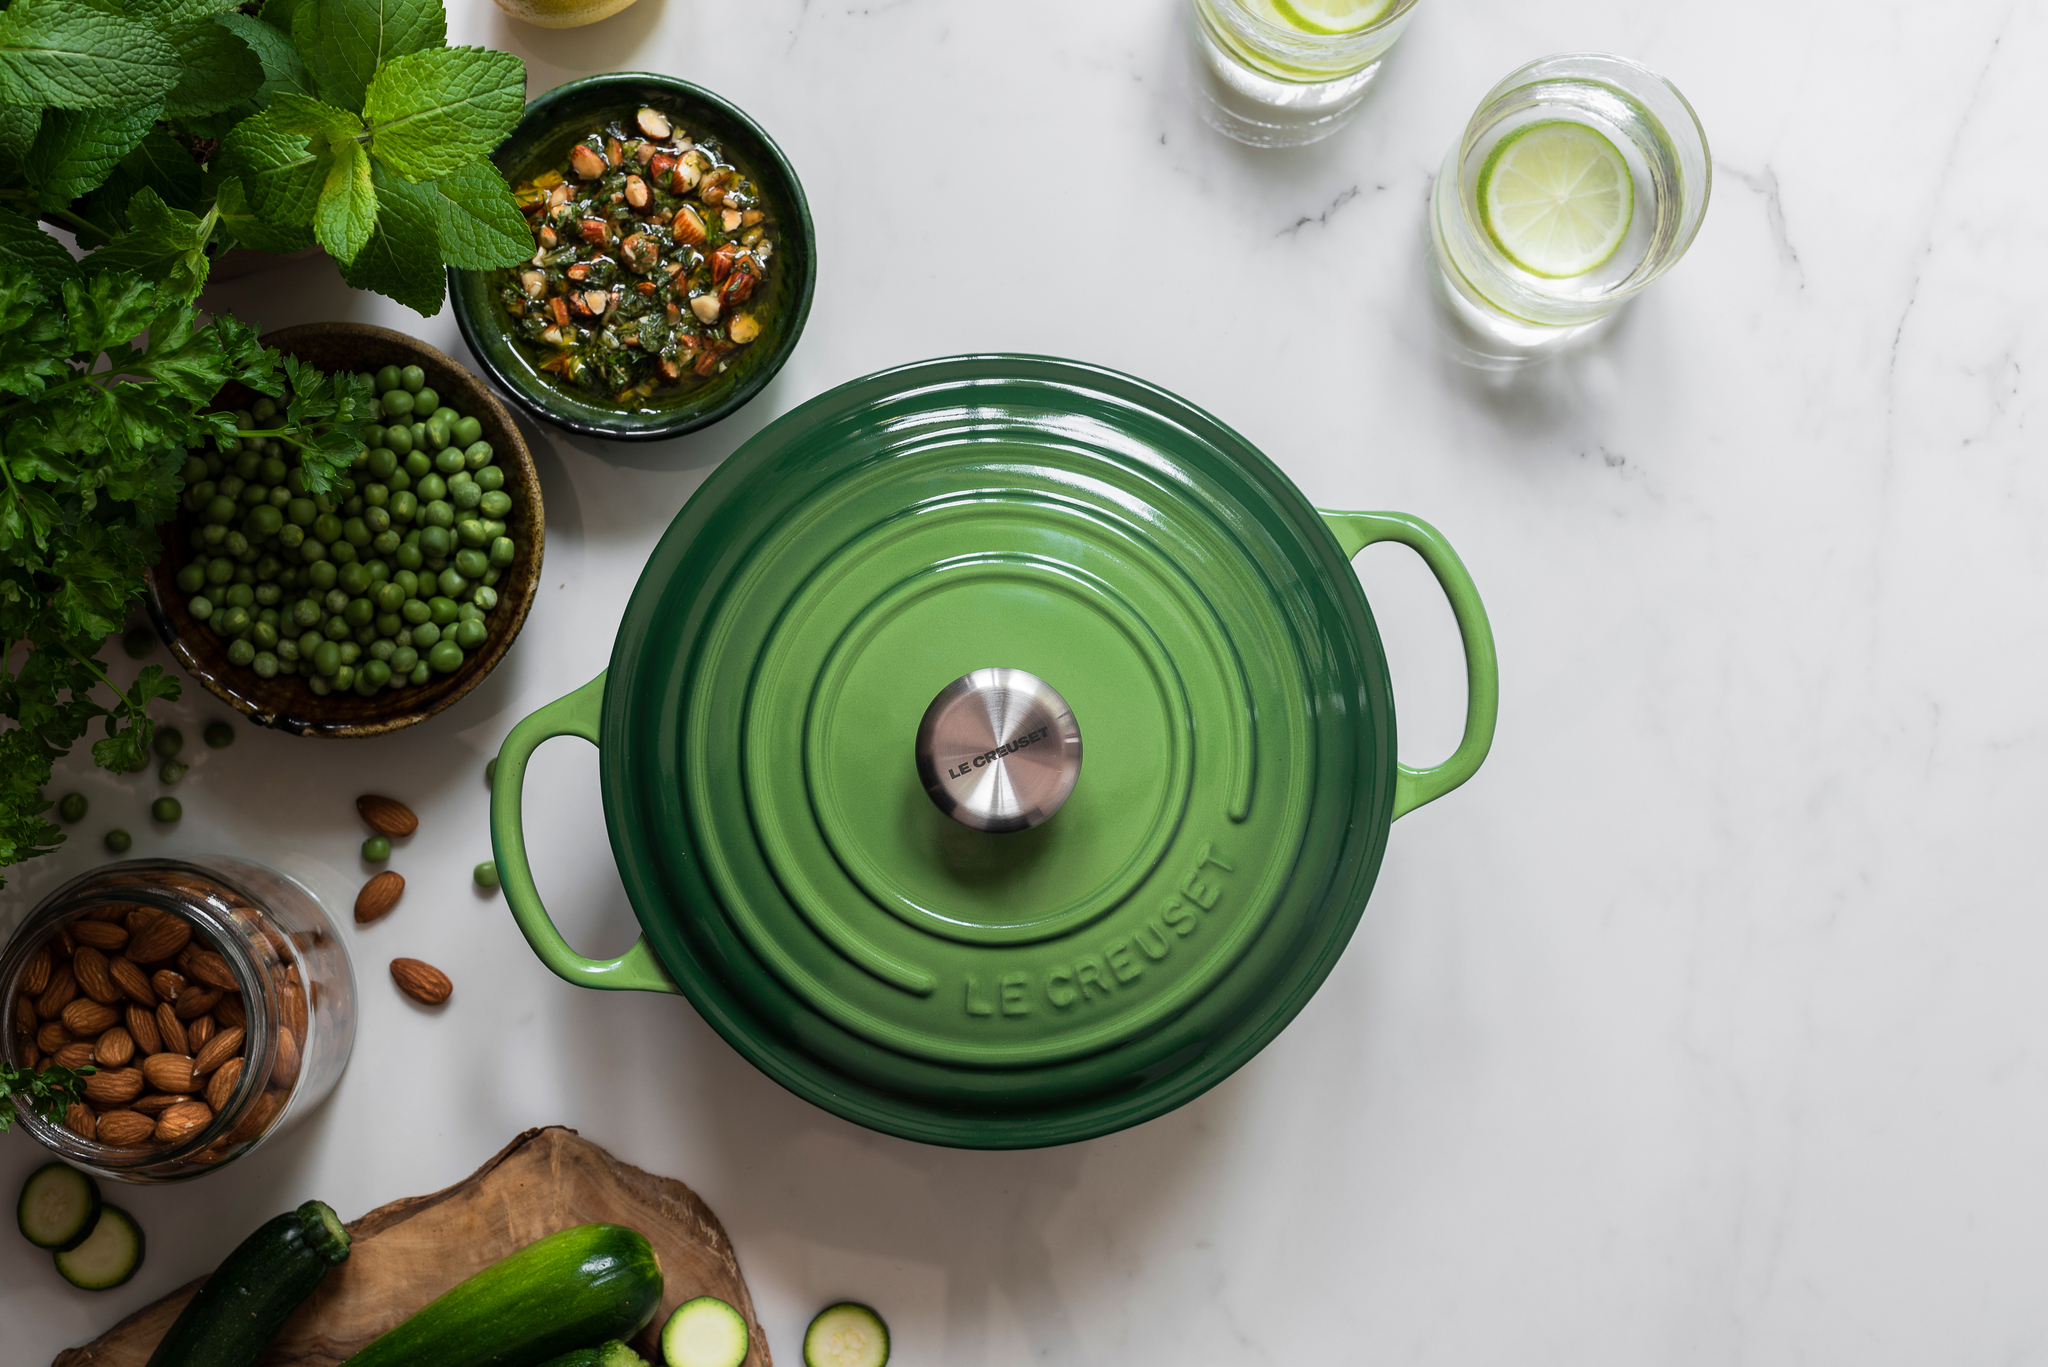 The exceptional heat retention of cast iron allows for slower cooking, keeping food moist, tender and flavoursome (photo © Le Creuset).